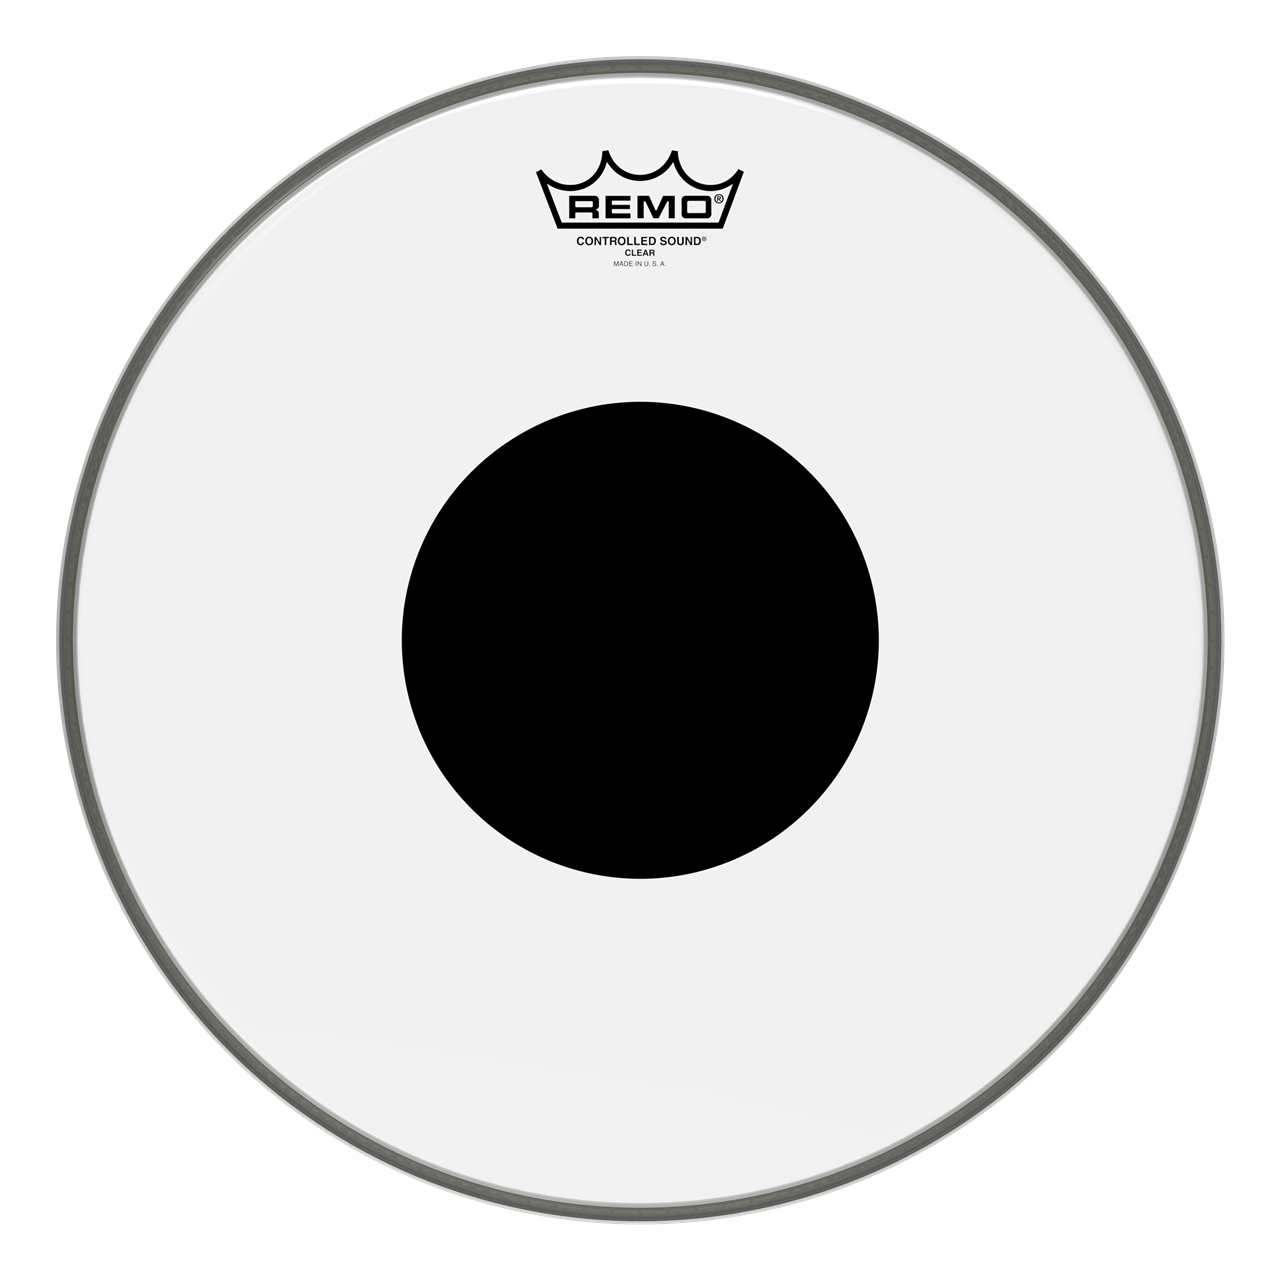 Remo CS-0315-10 Controlled Sound, 15" Clear, Black Dot